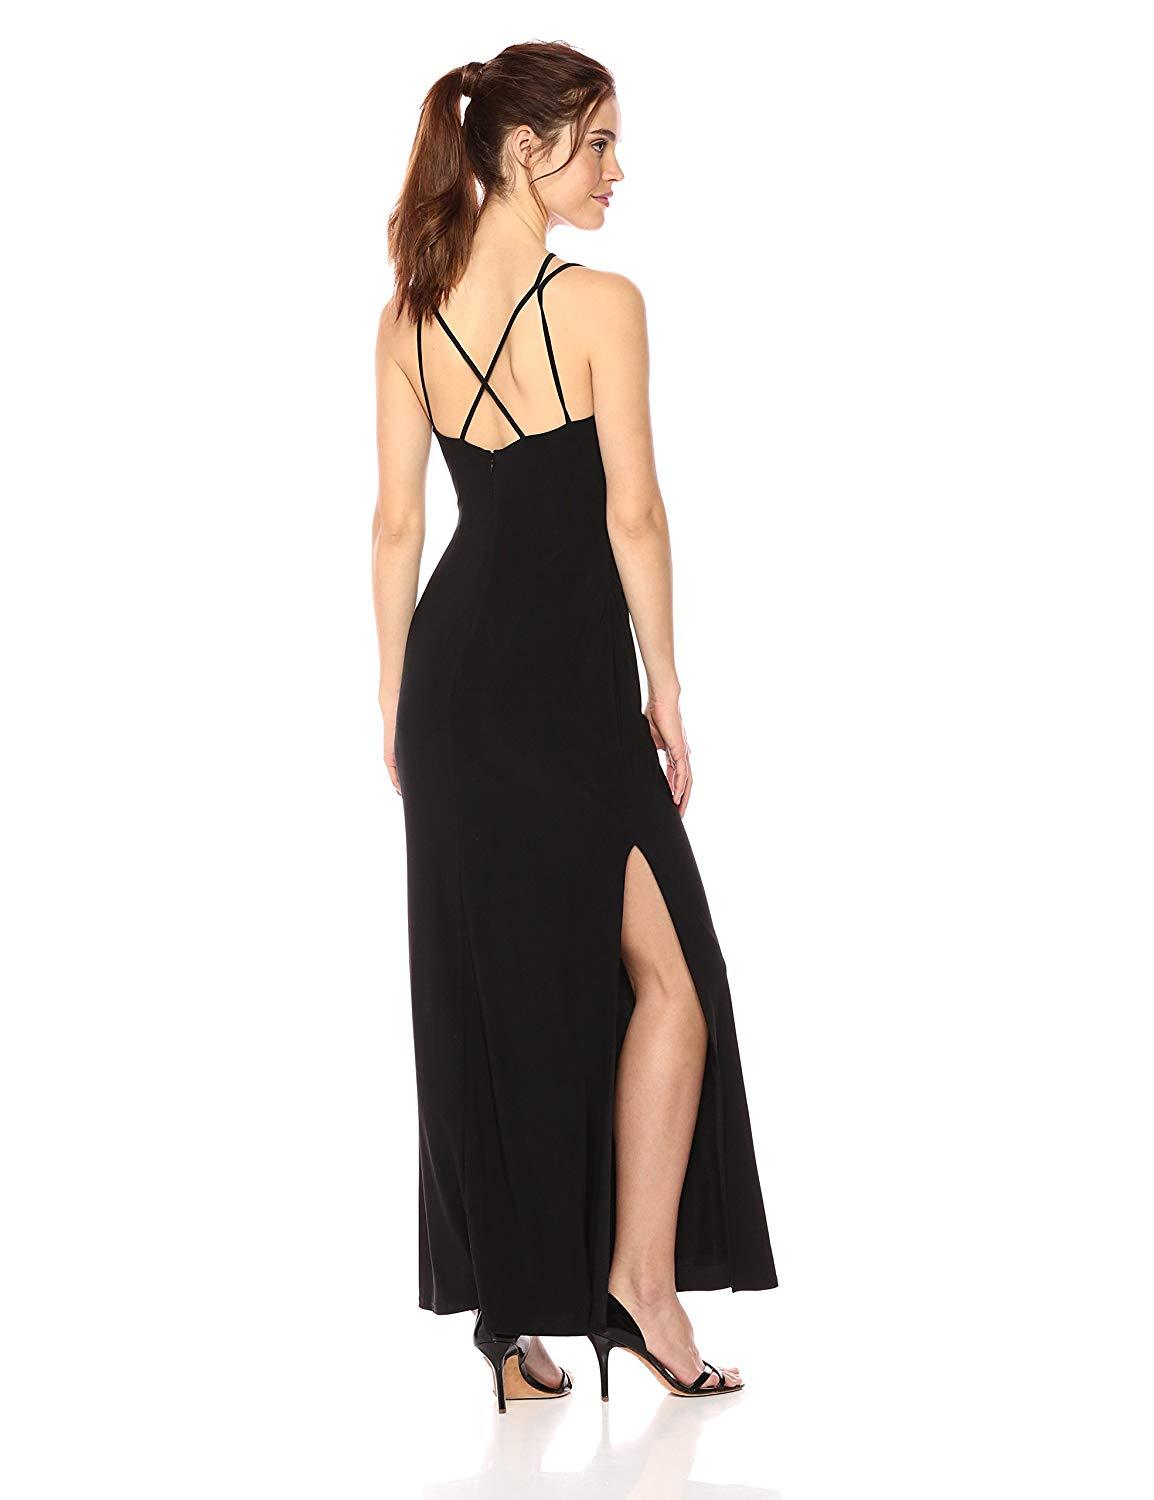 Laundry - 97R25440 Crisscross Front High Slit Jersey Gown In Black